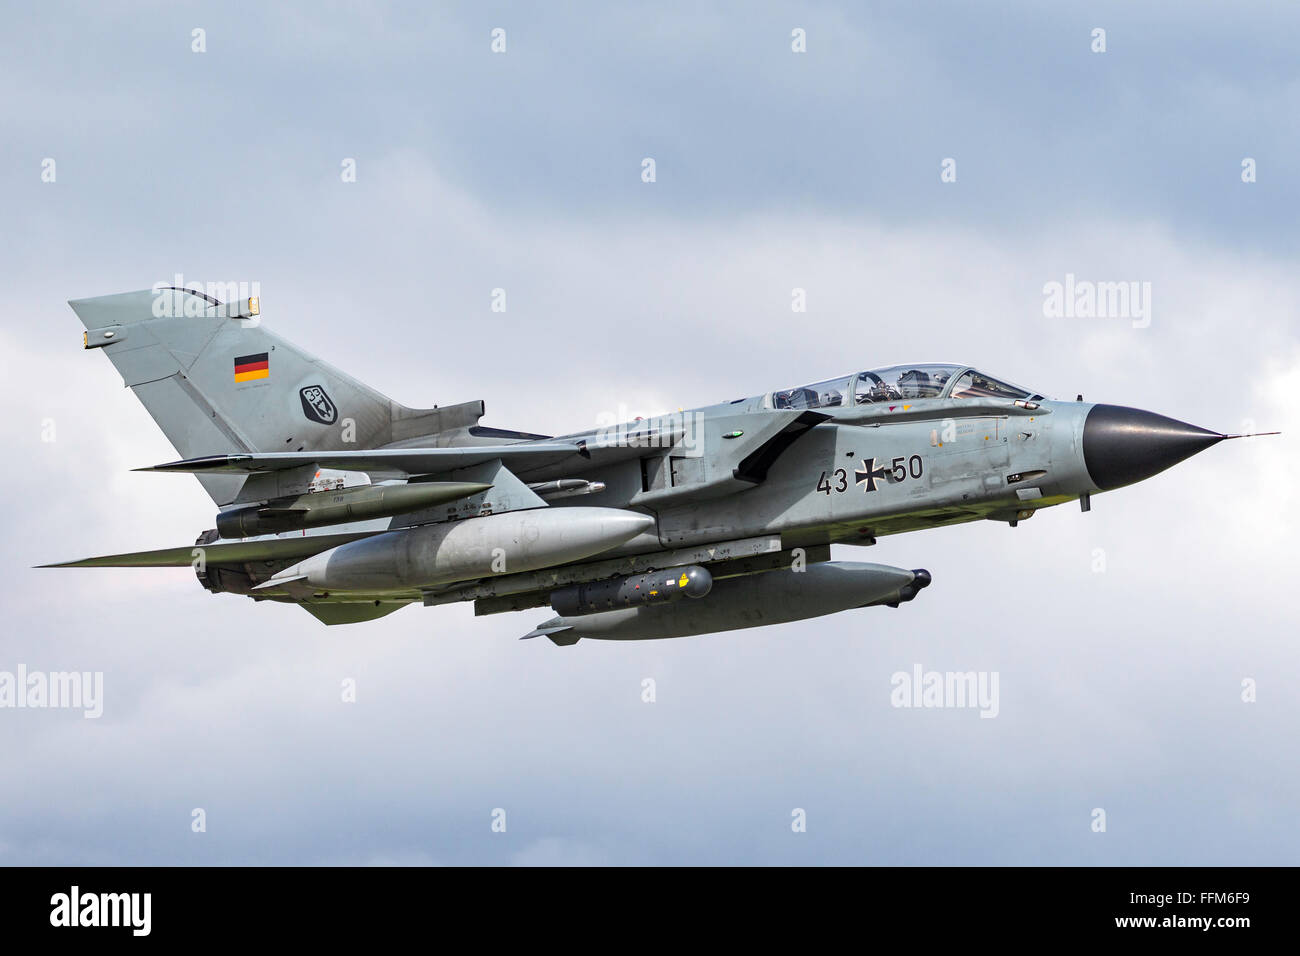 German Air Force (Luftwaffe) Panavia Tornado IDS 43+50 fighter aircraft departing Payerne Air Base in Switzerland. Stock Photo